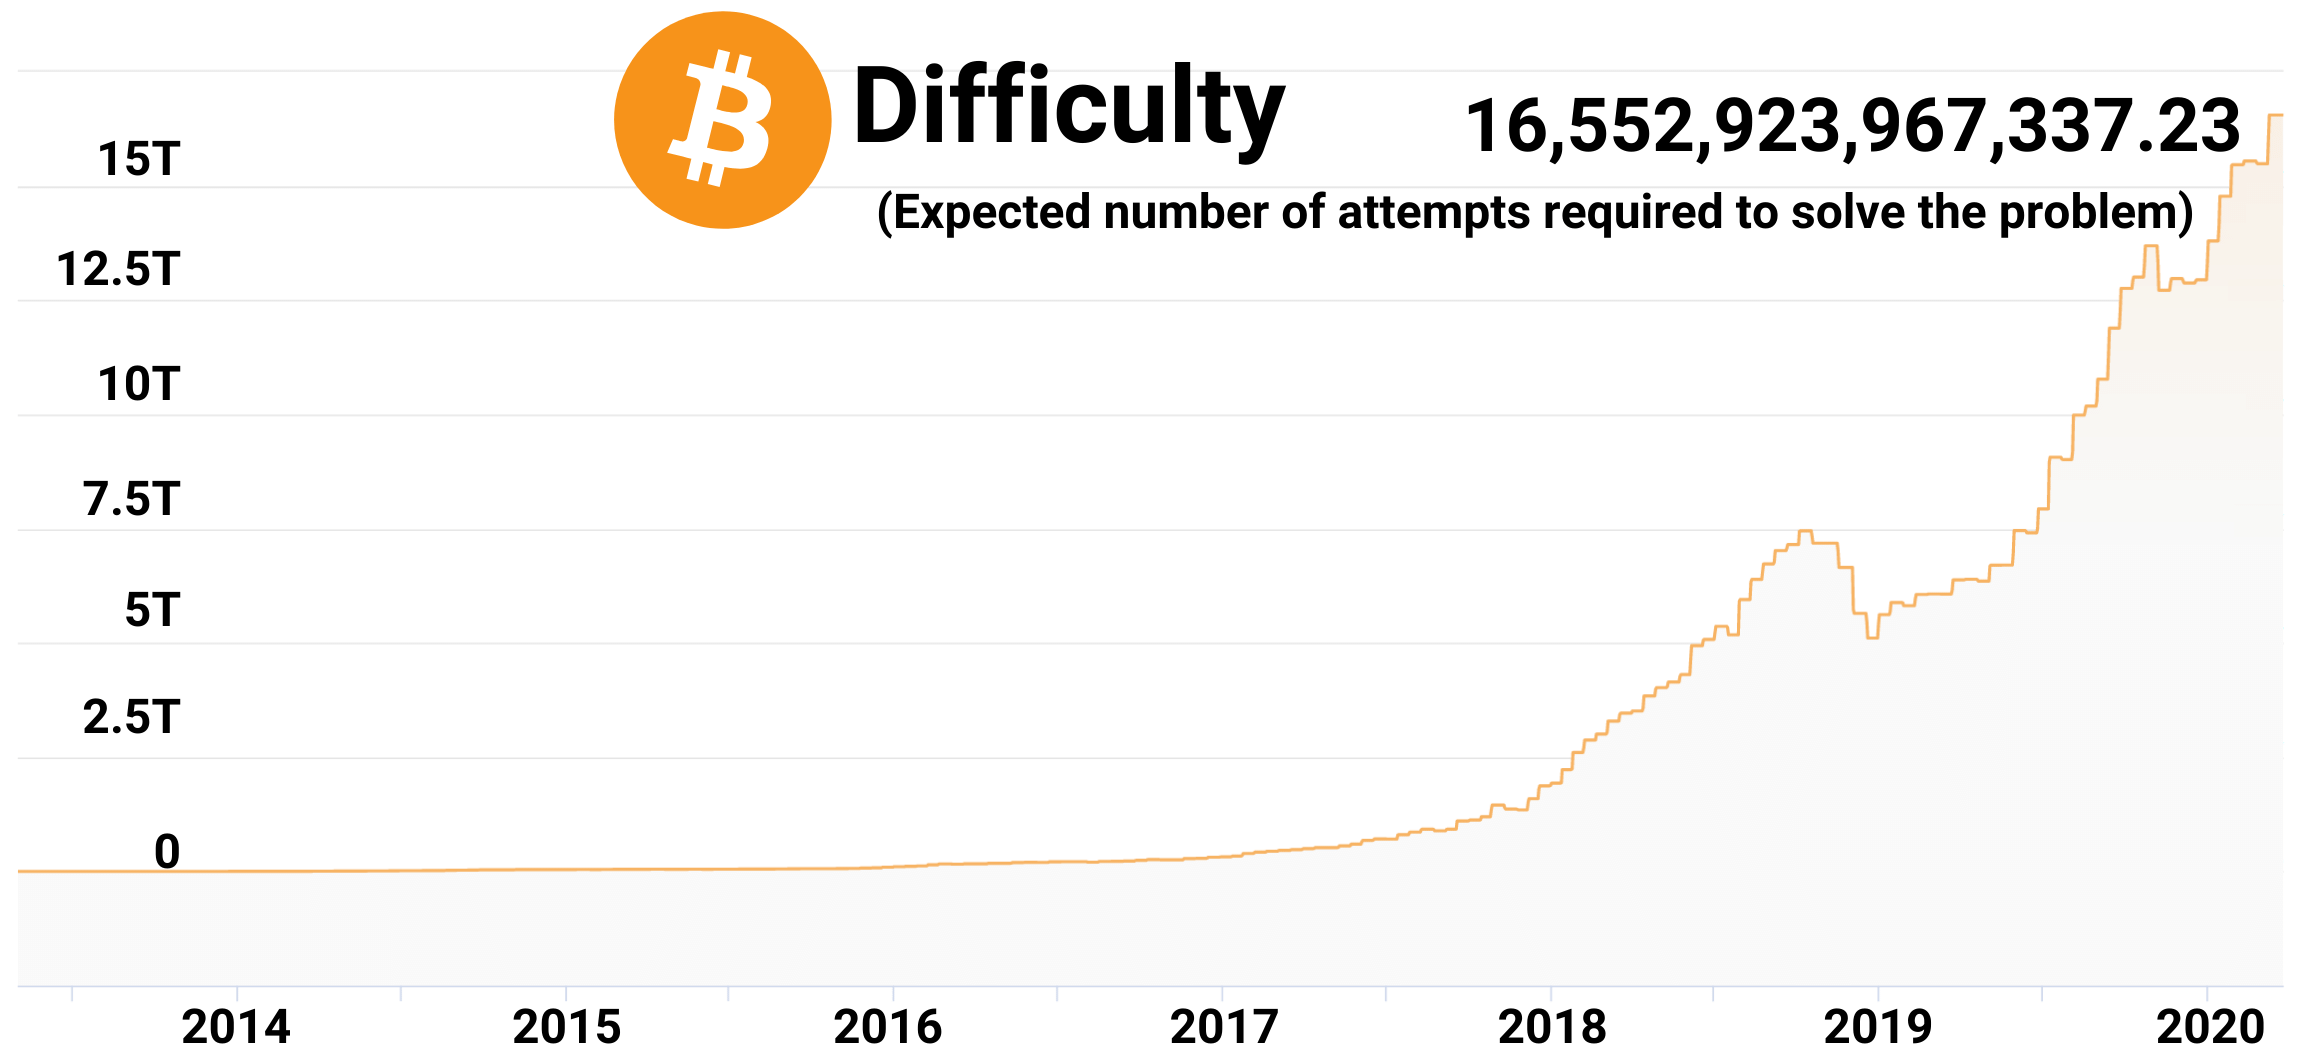 A chart displaying the ever-increasing difficulty level set in Bitcoin. The difficulty level is the expected number of attempts required to solve the problem. It reached 2.5 trillion in 2018, 10 trillion in 2019, and exceeded 15 trillion in early 2020, reaching 16,552,923,967,337.23.